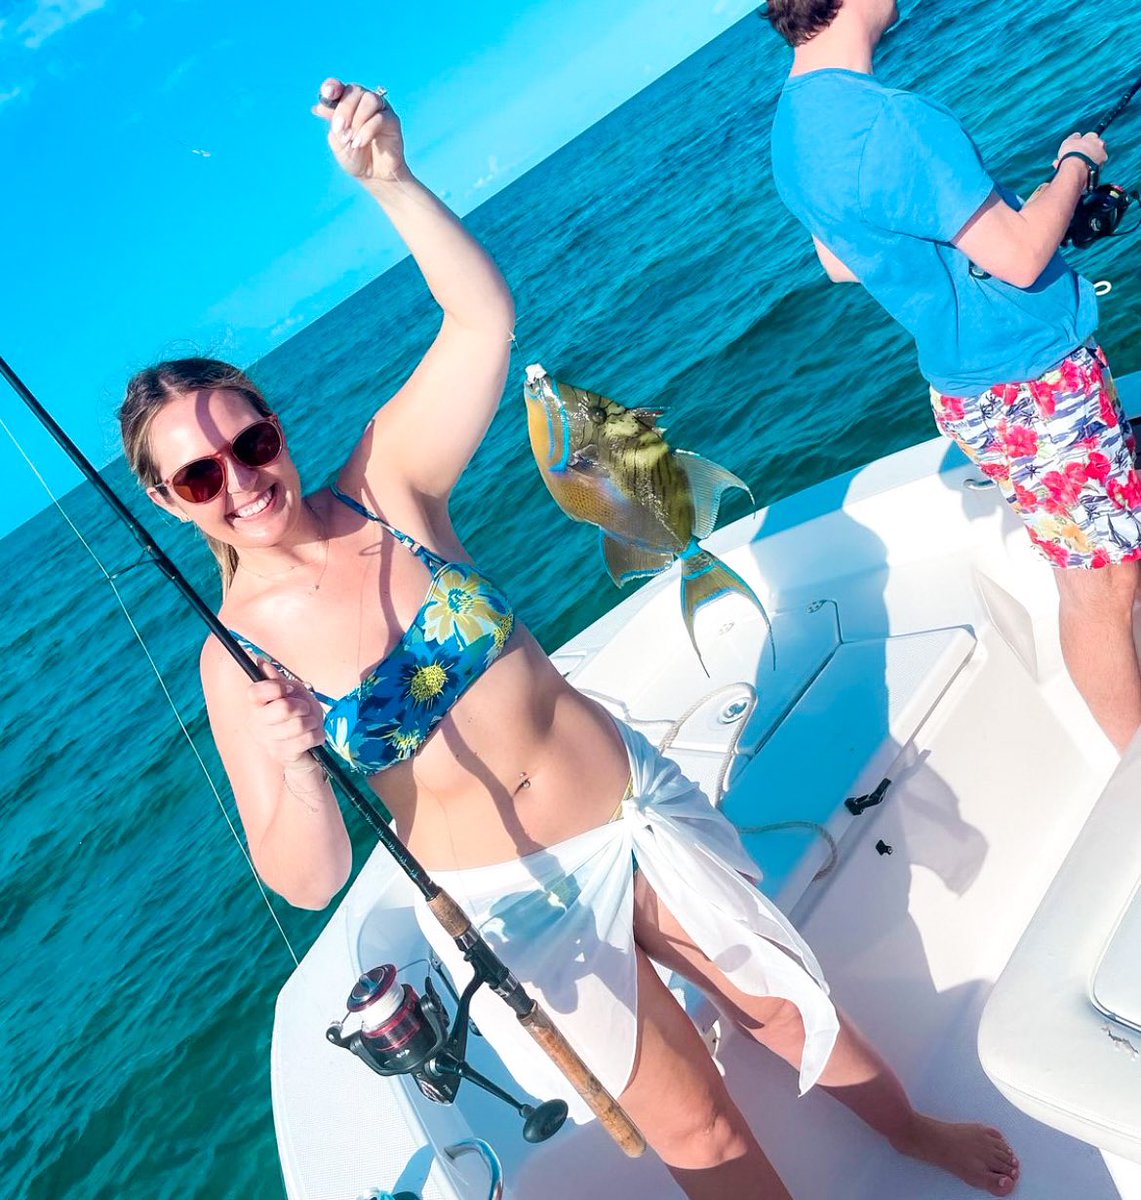 ✨Your Ambergris Cay all-inclusive experience includes complimentary bone-fishing and reef fishing 🎣#ambergriscay #allinclusiveluxury #turksandcaicos 

#guestphotos 📸: Maddie Hargett 

#privateisland #fishing #saltlife #reeffishing #honeymoongoals #turksandcaicosislands